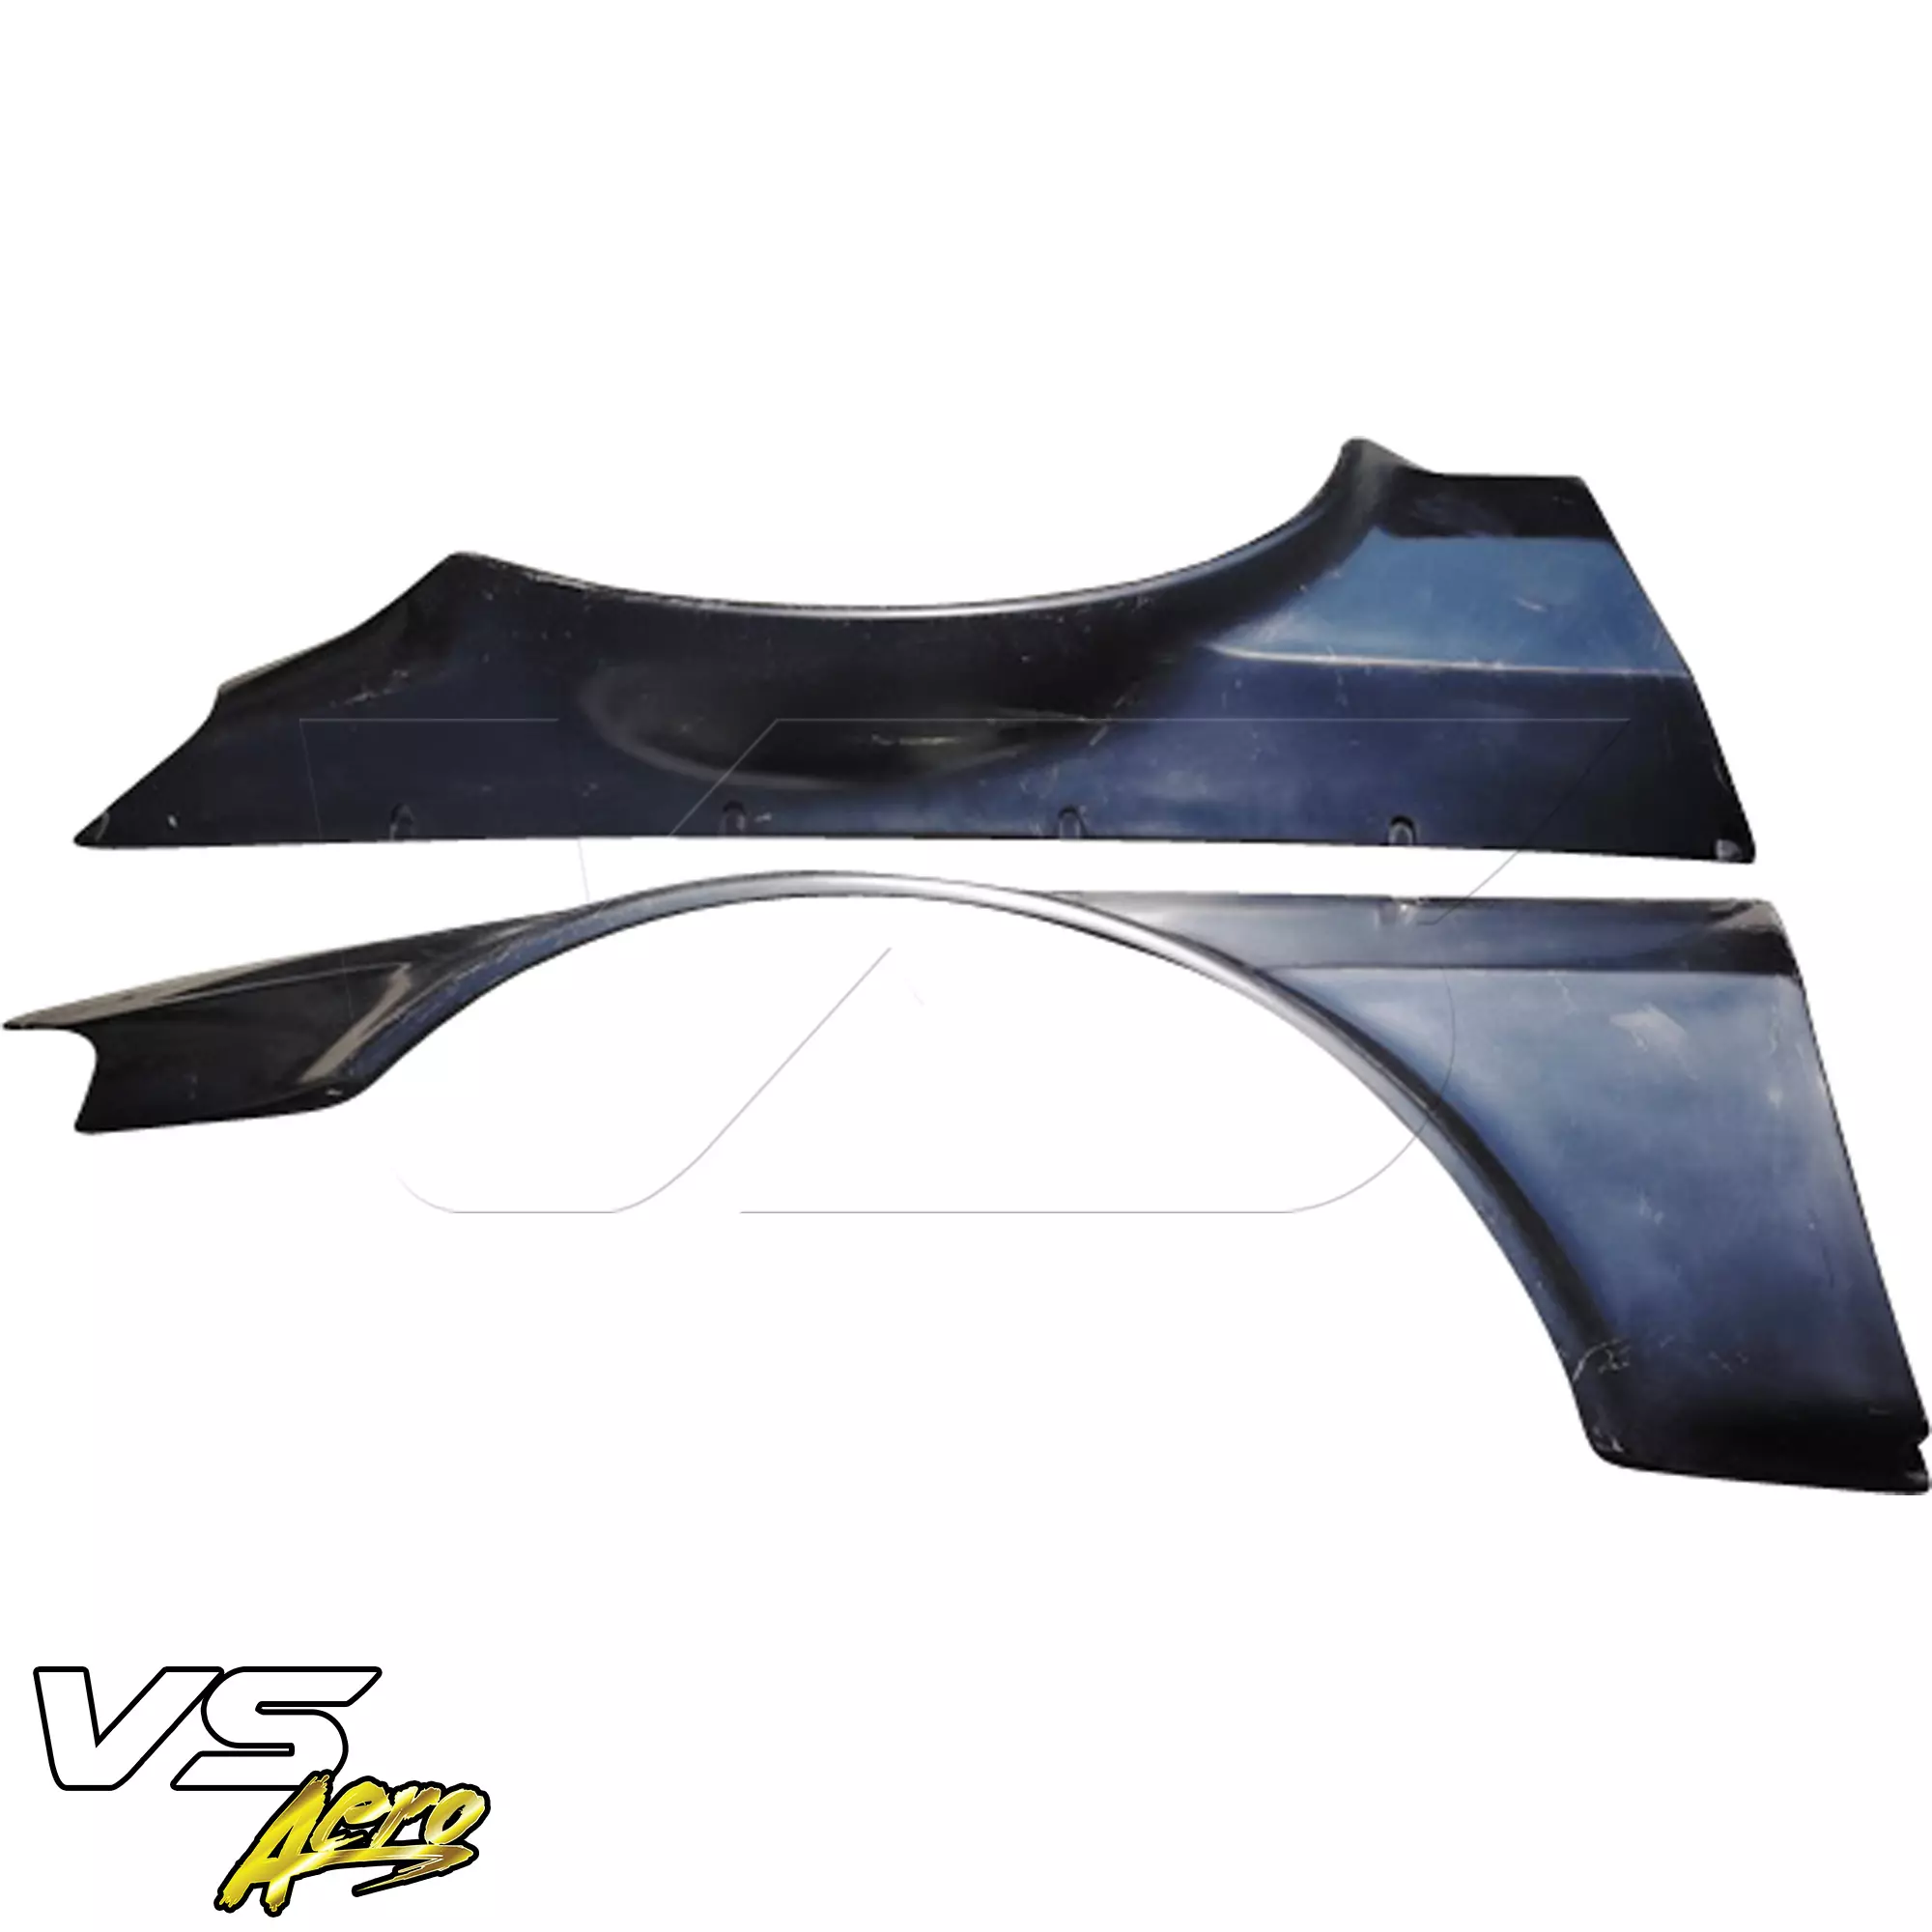 VSaero FRP TKYO Wide Body 65mm Fender Flares (front) > Nissan Skyline R33 1995-1998 > 2dr Coupe - Image 7